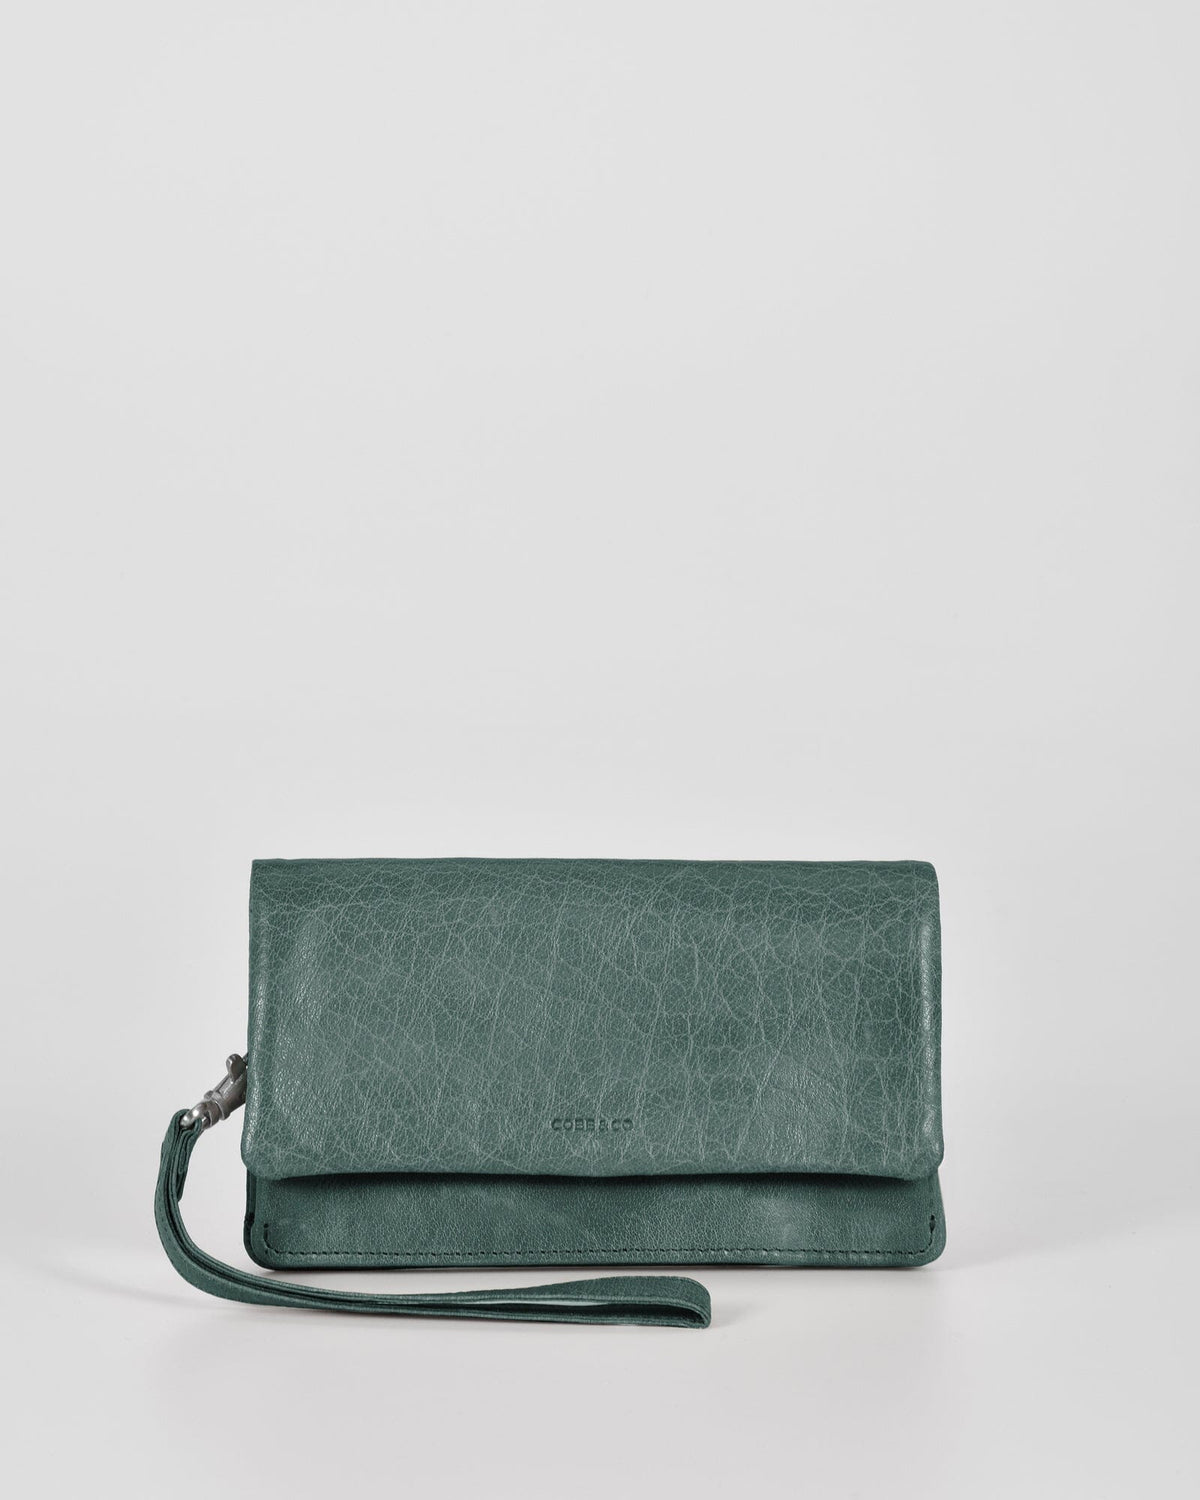 Albury Soft Leather Fold Over Wallet